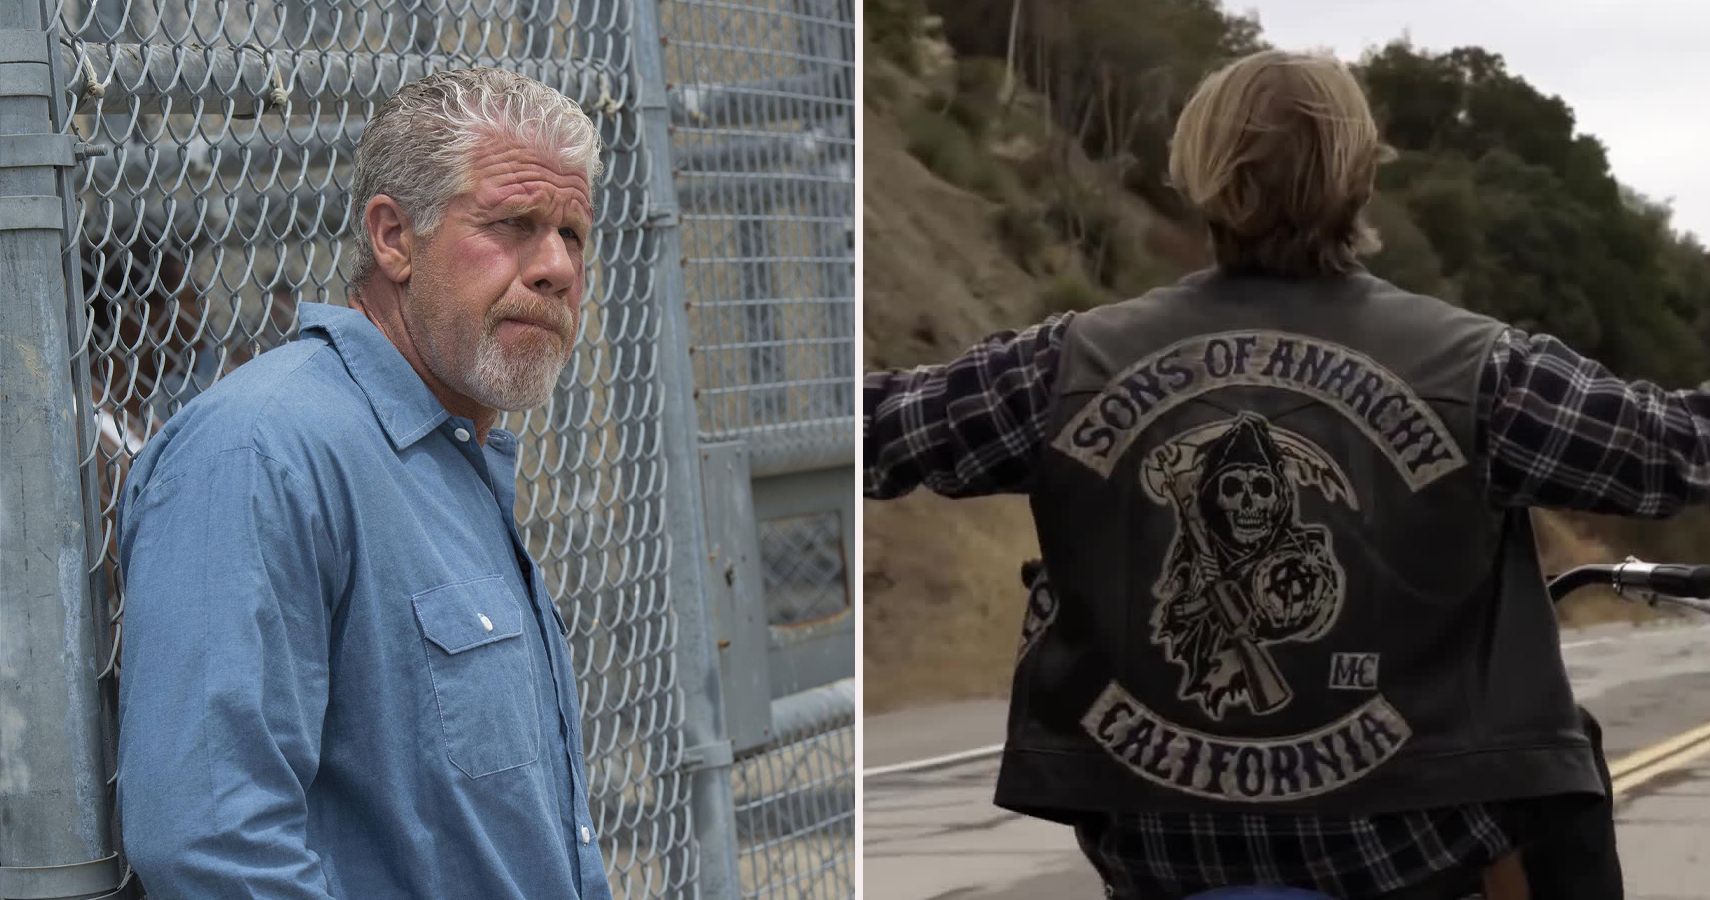 Sons Of Anarchy 10 Unpopular Opinions About The Show (According To Reddit)